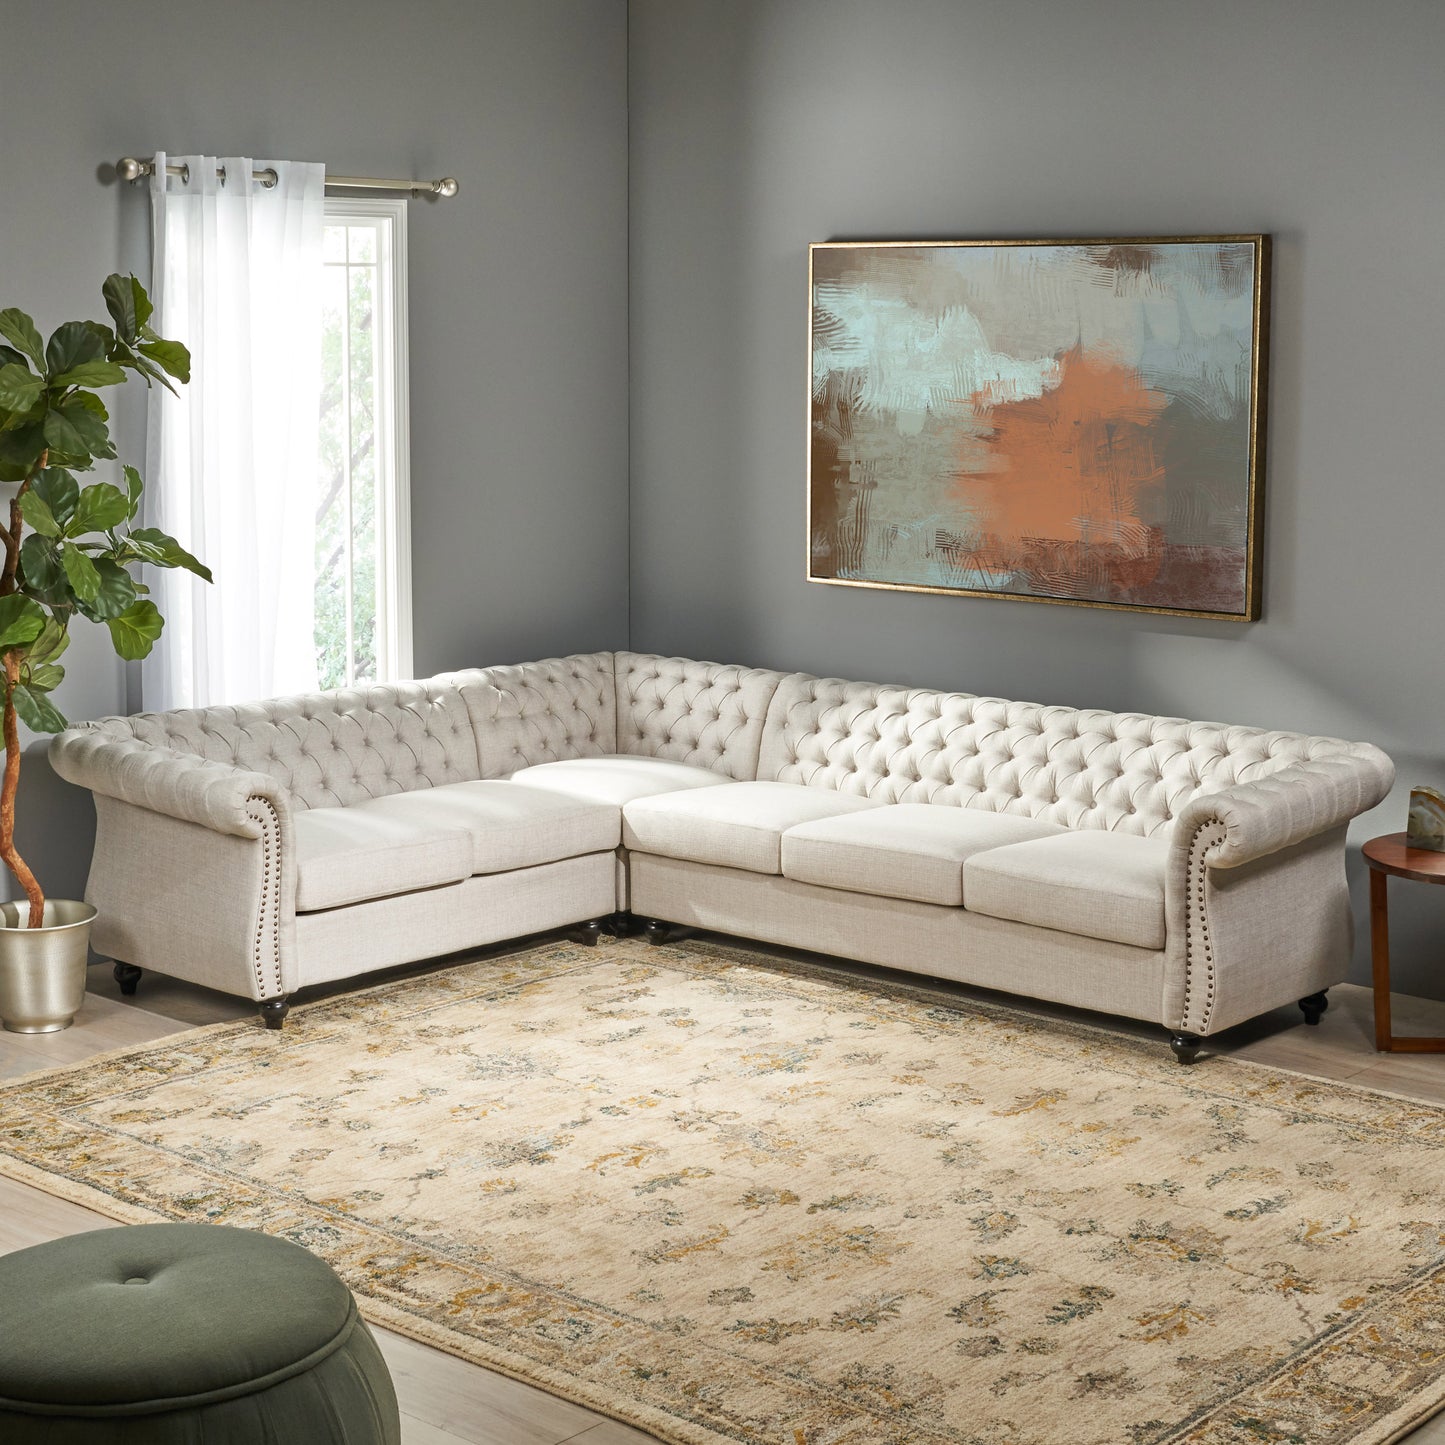 Rachel 6 Seater Tufted Fabric Chesterfield Sectional